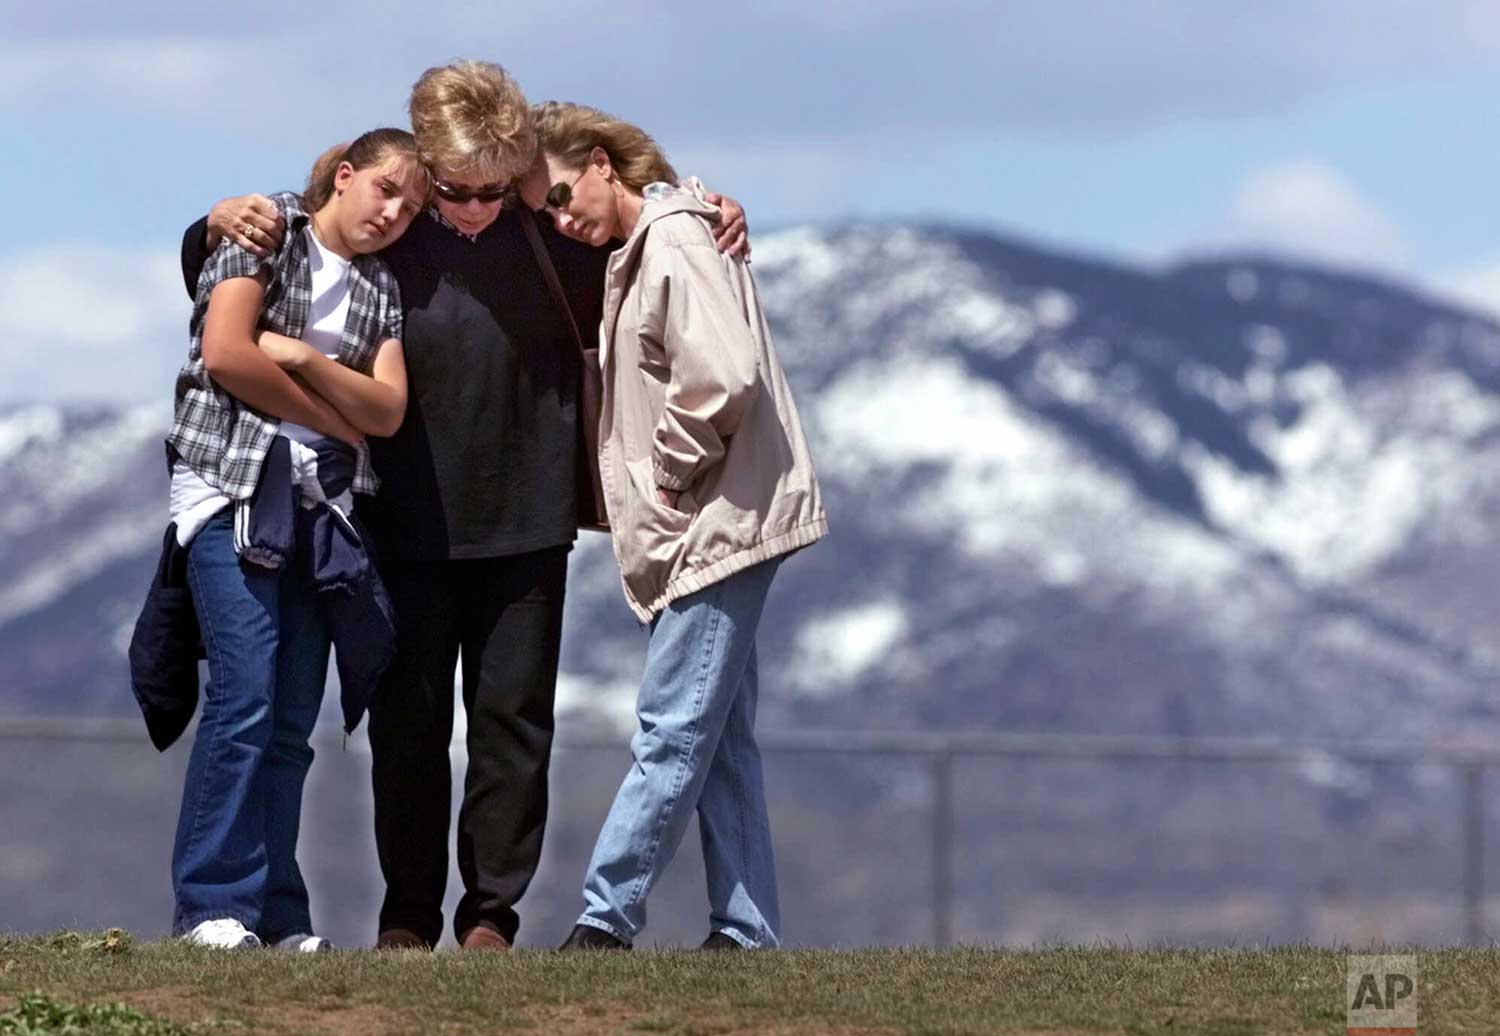  Standing on a hill above Columbine High School in Littleton, Colo., Krista Sleeth, Bev Fleer, and Cindy Sleeth hug during a moment of silence Tuesday, April 27, 1999 for the victims of the shooting spree at school. Krista, Bev and Cindy are three ge